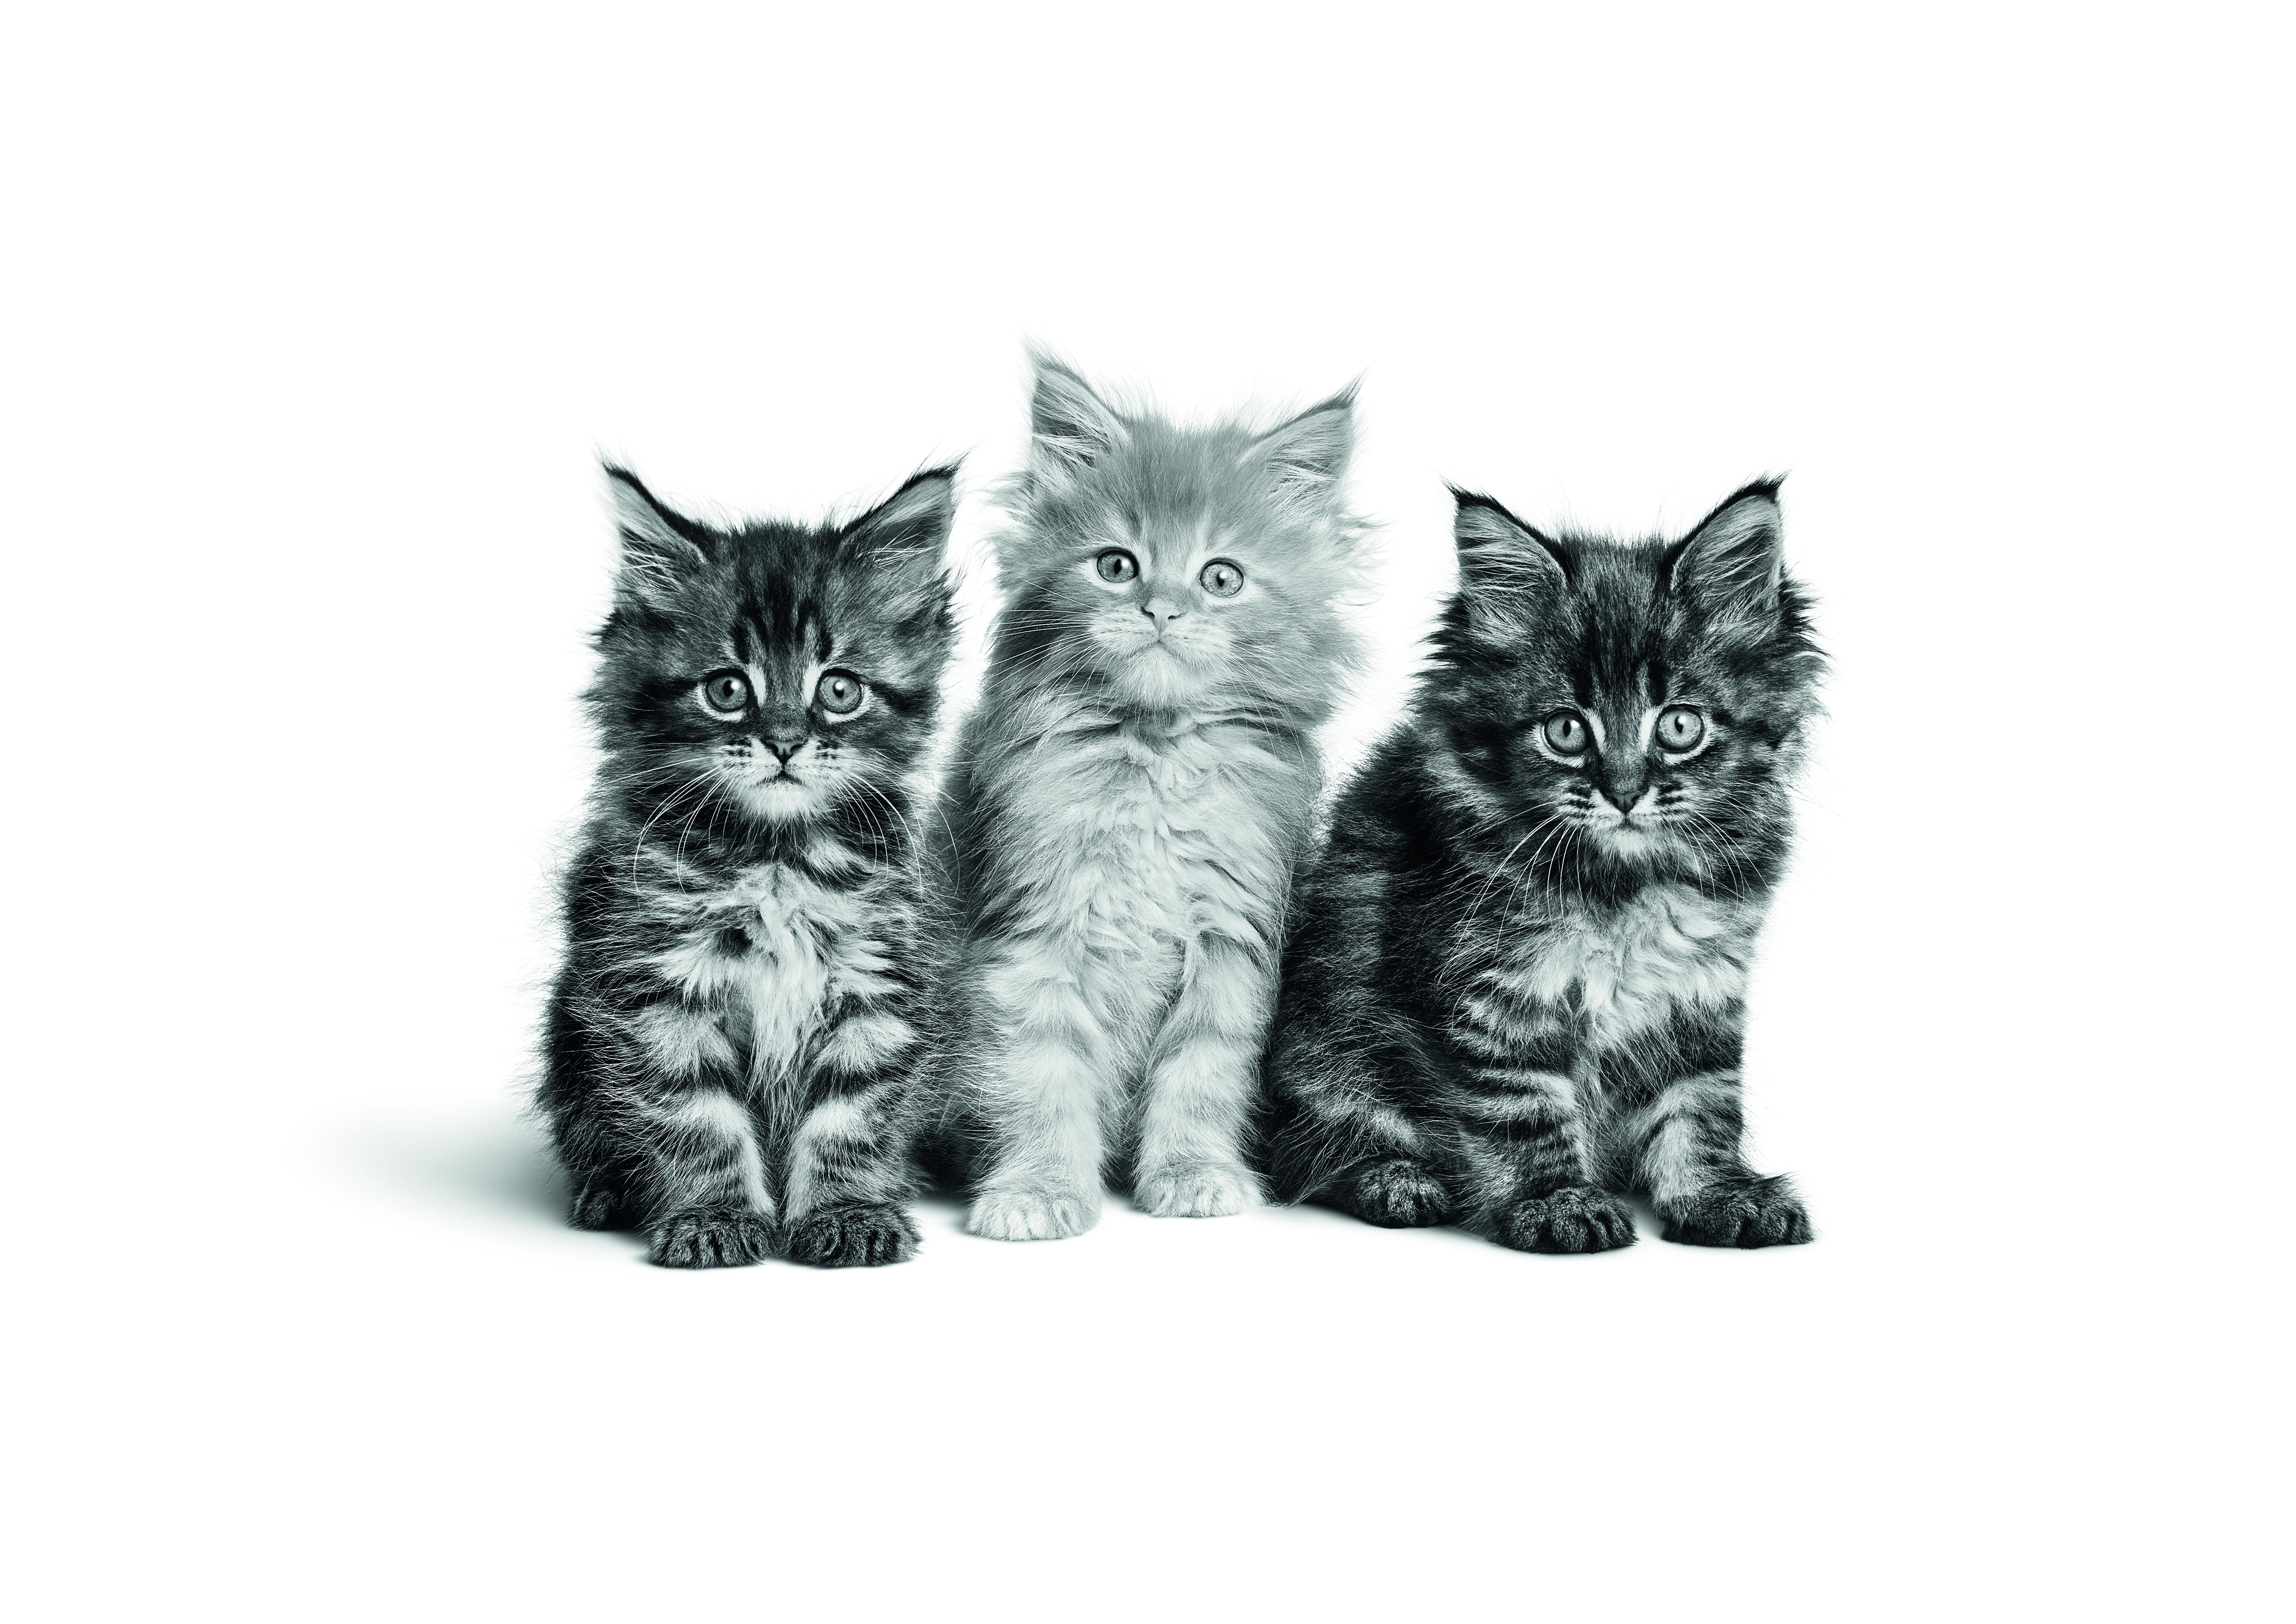 Three Maine Coon kittens sitting in black and white on a white background